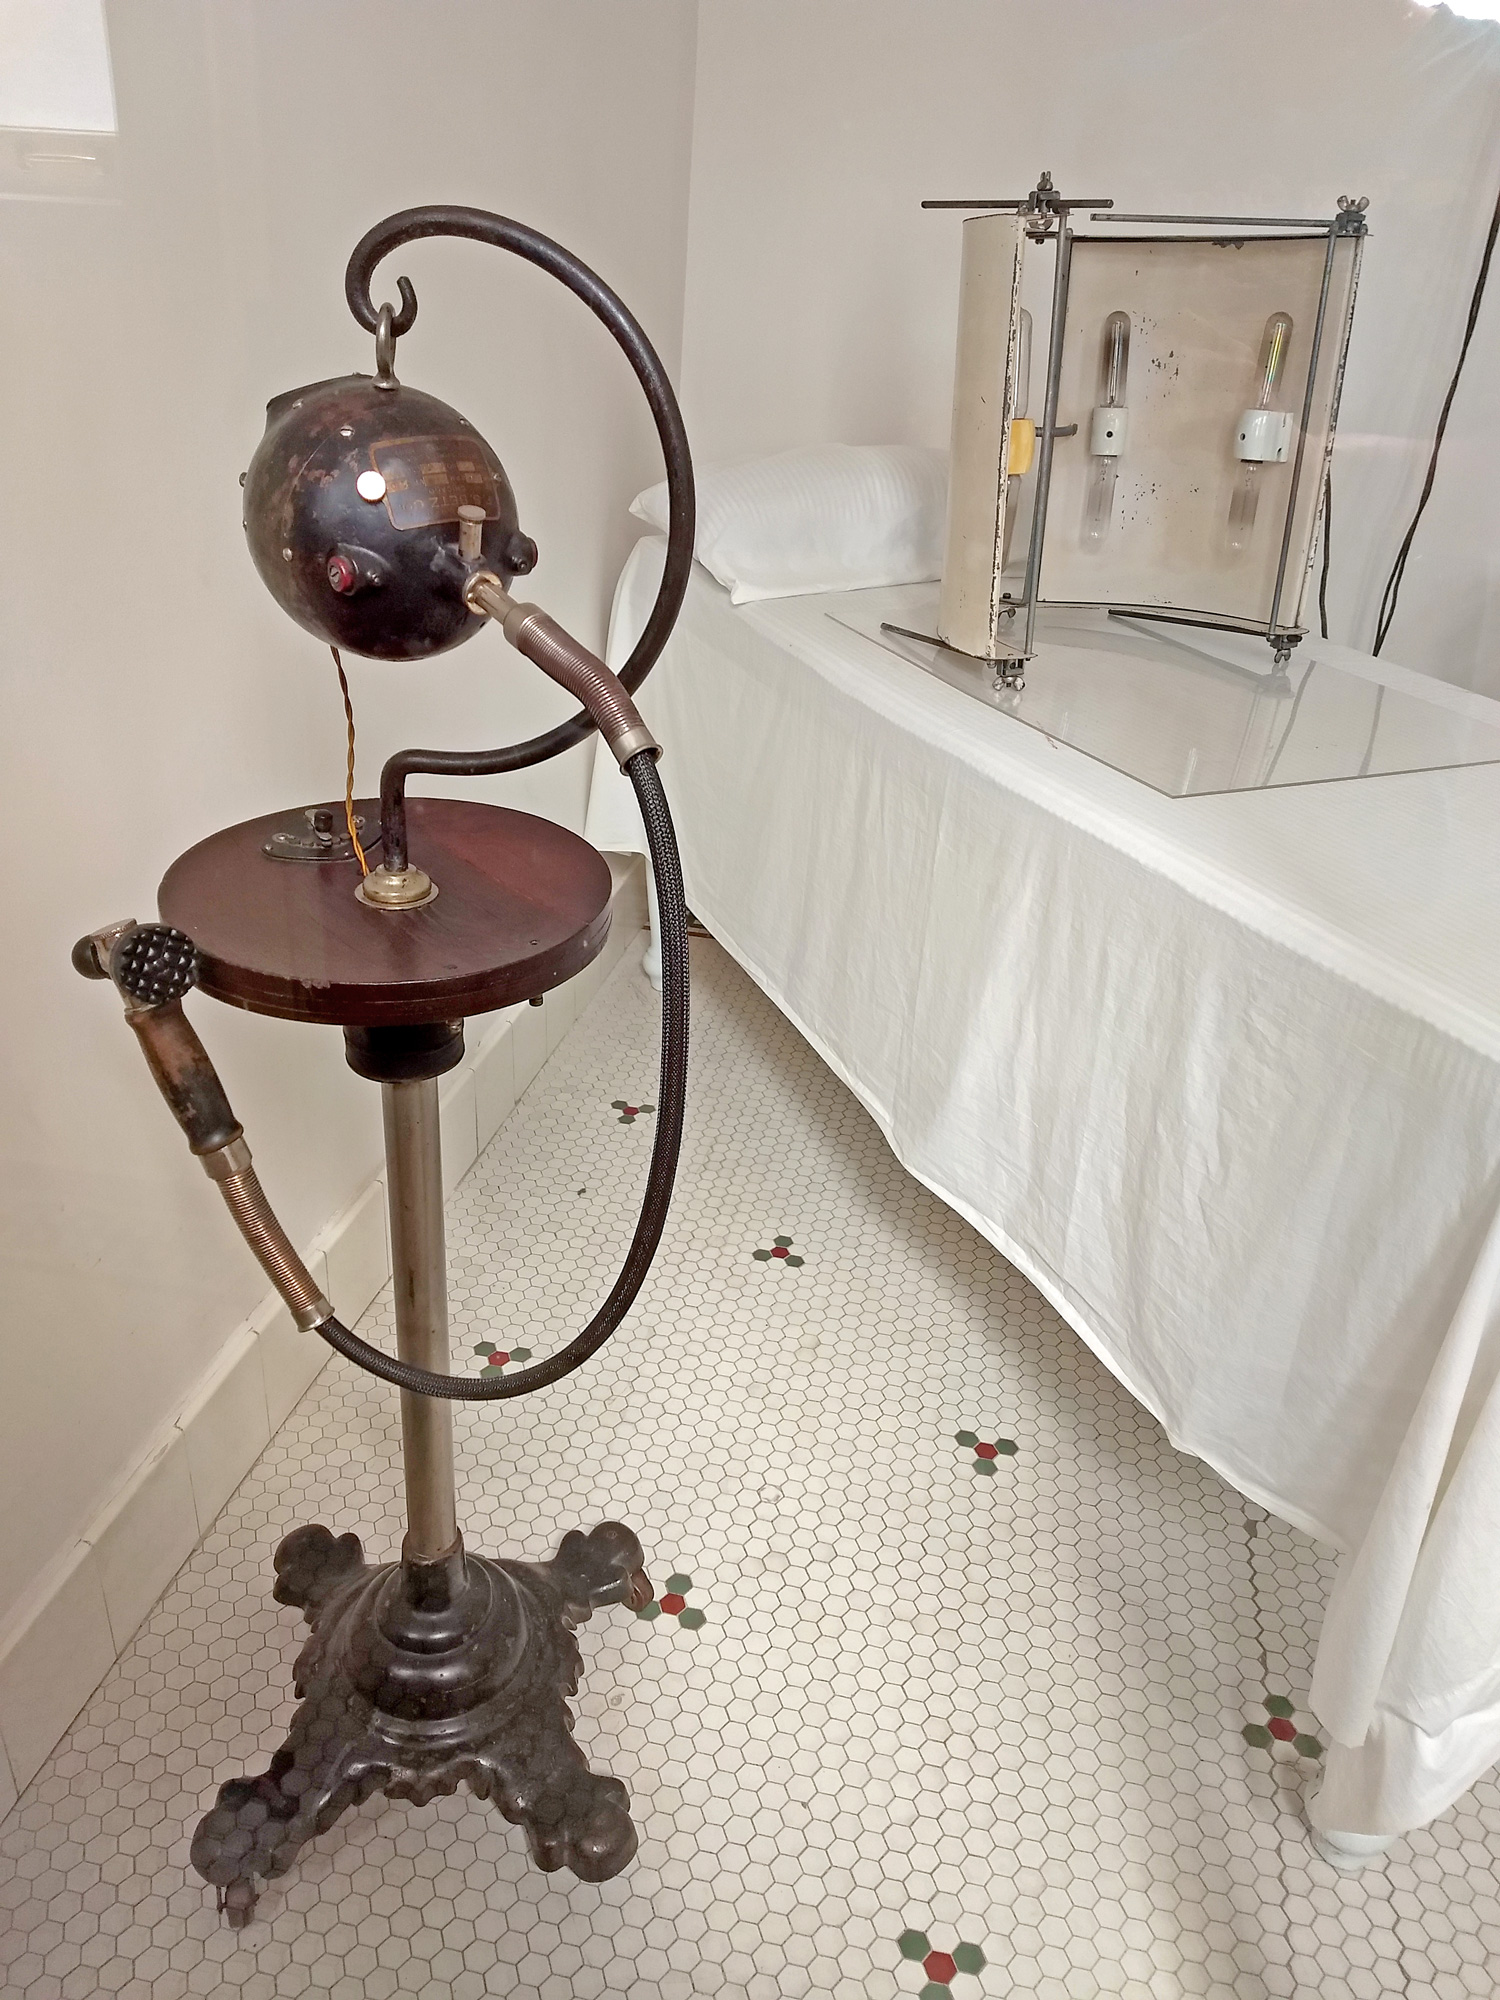 A large shiny globe with hoses on a stand, attachments on a single bed.